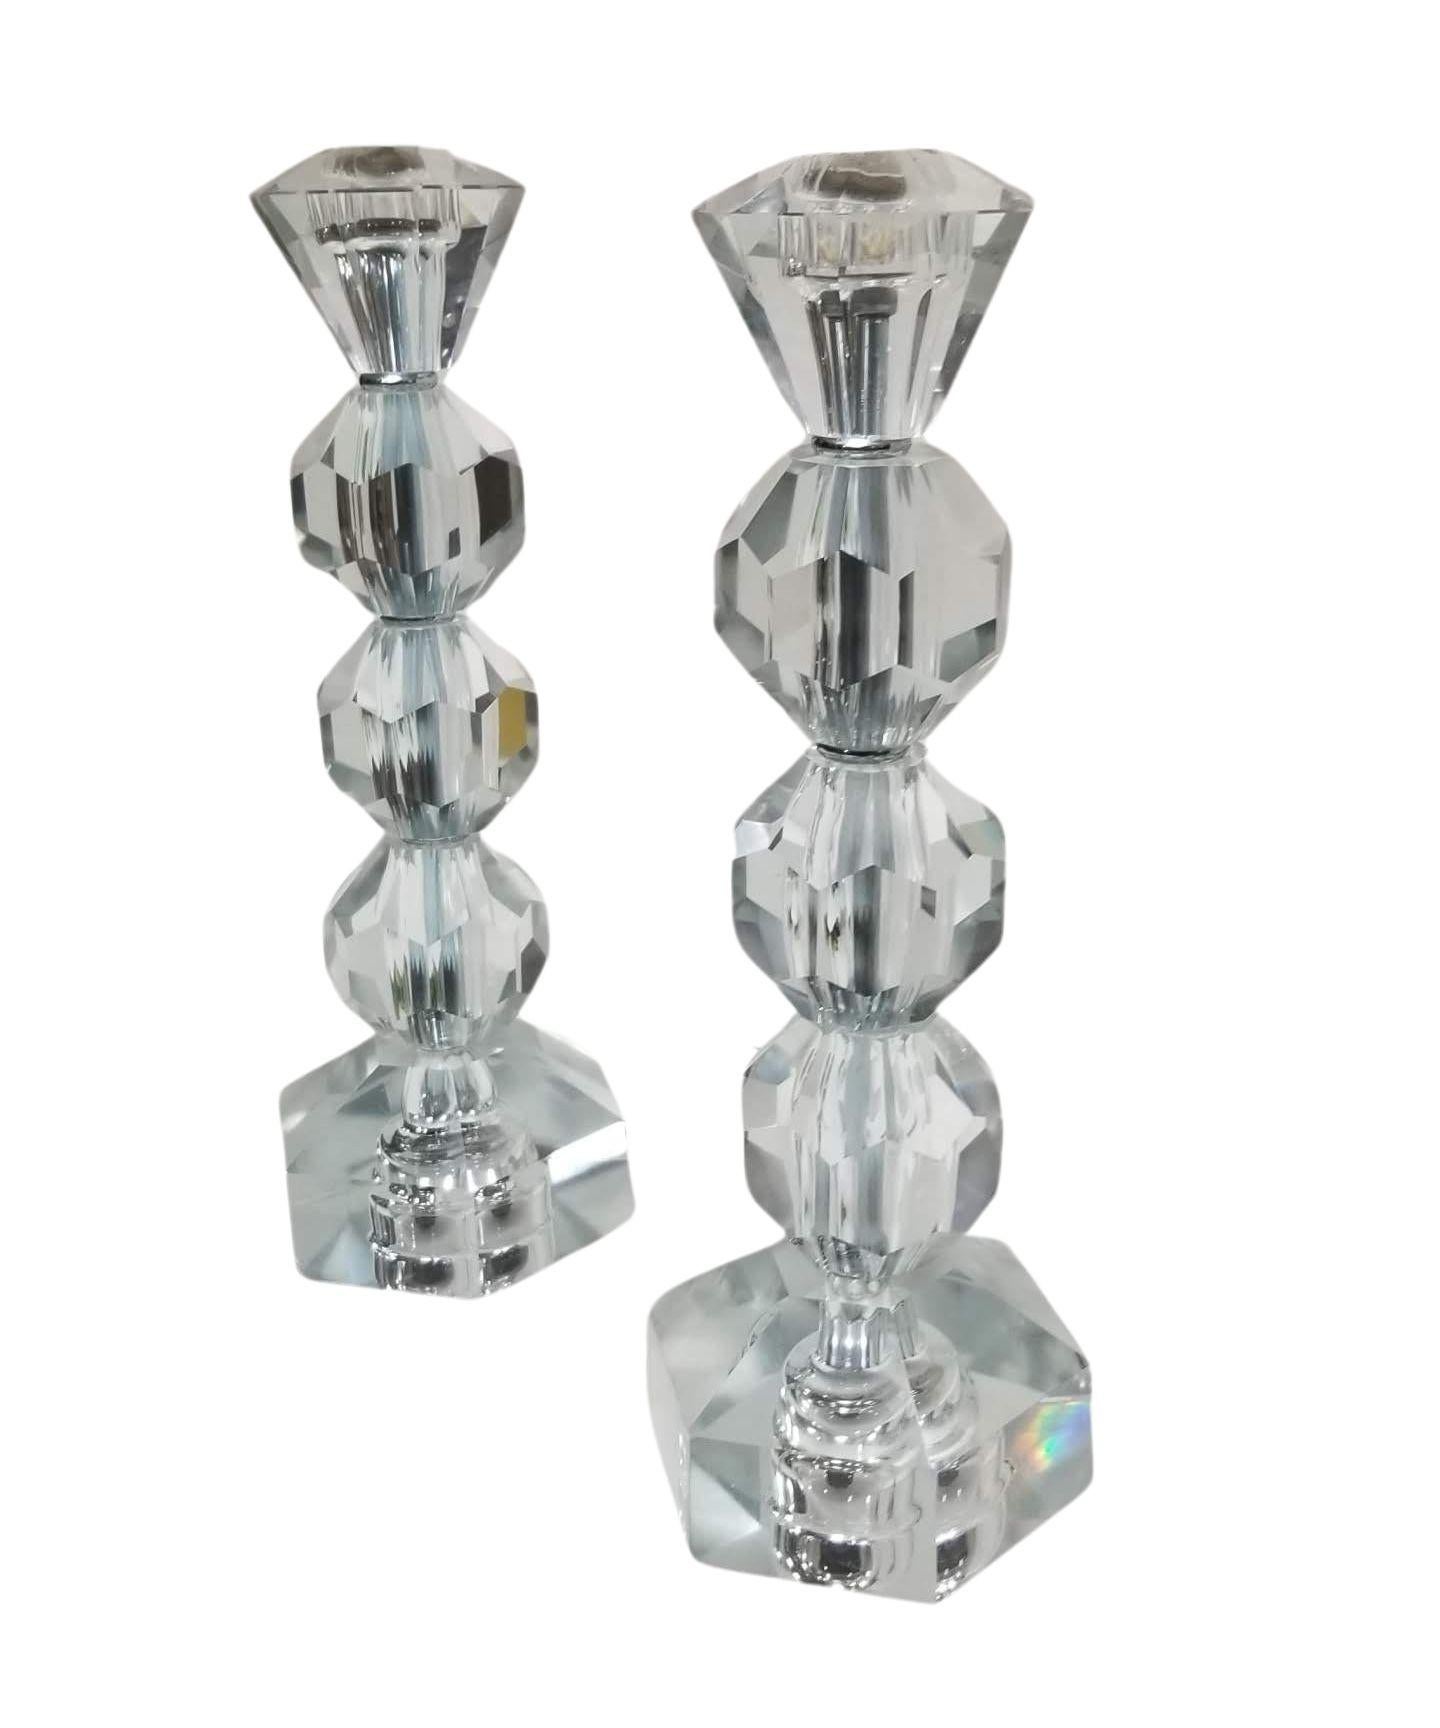 North American Mid Century Crystal Candlestick Diamond Top - Pair For Sale